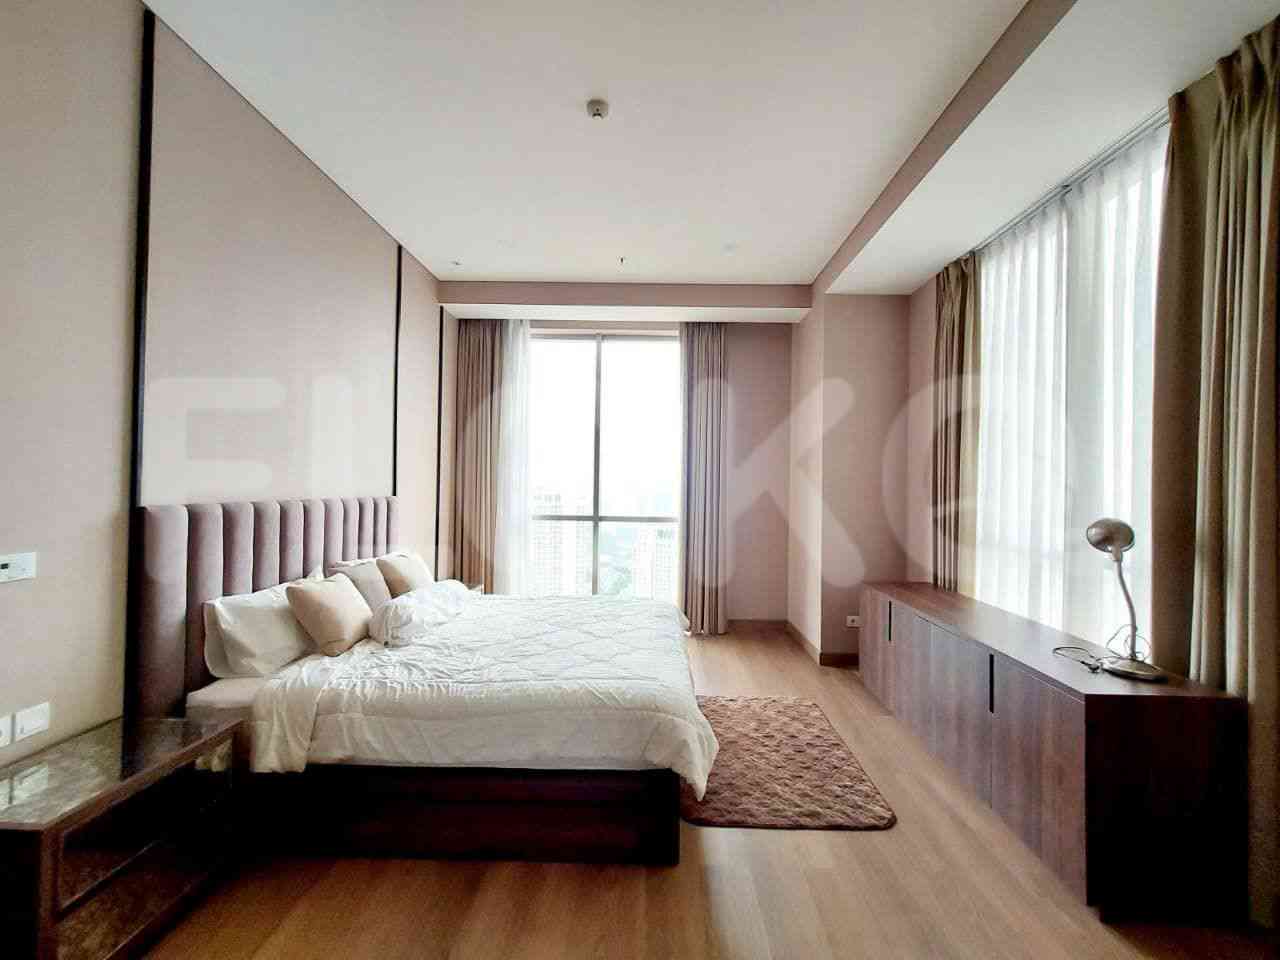 2 Bedroom on 38th Floor for Rent in Pakubuwono Spring Apartment - fgaf4e 4